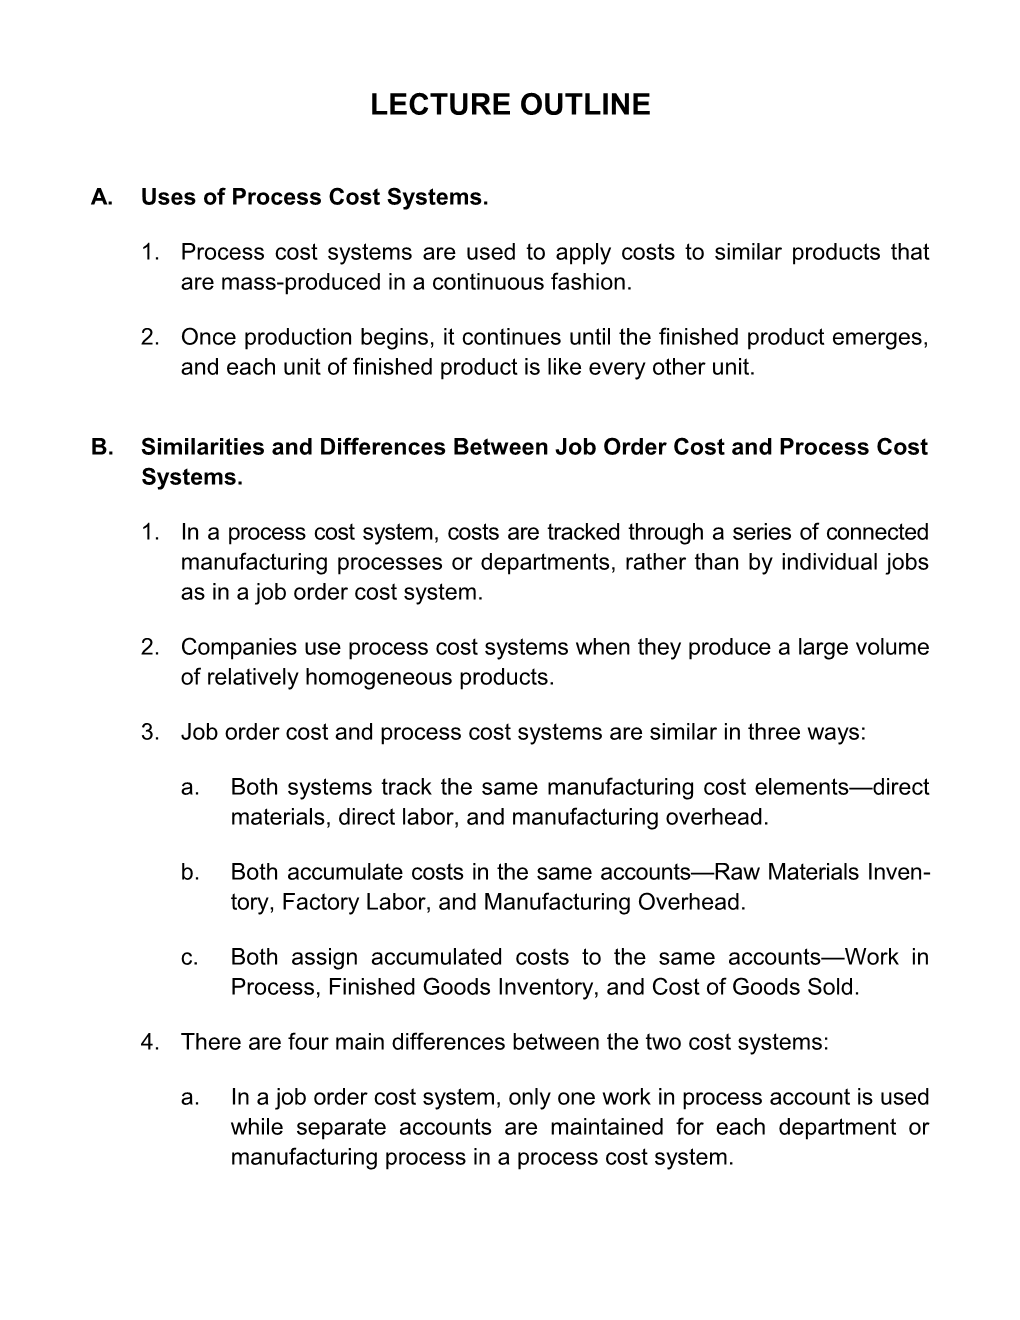 A. Uses of Process Cost Systems